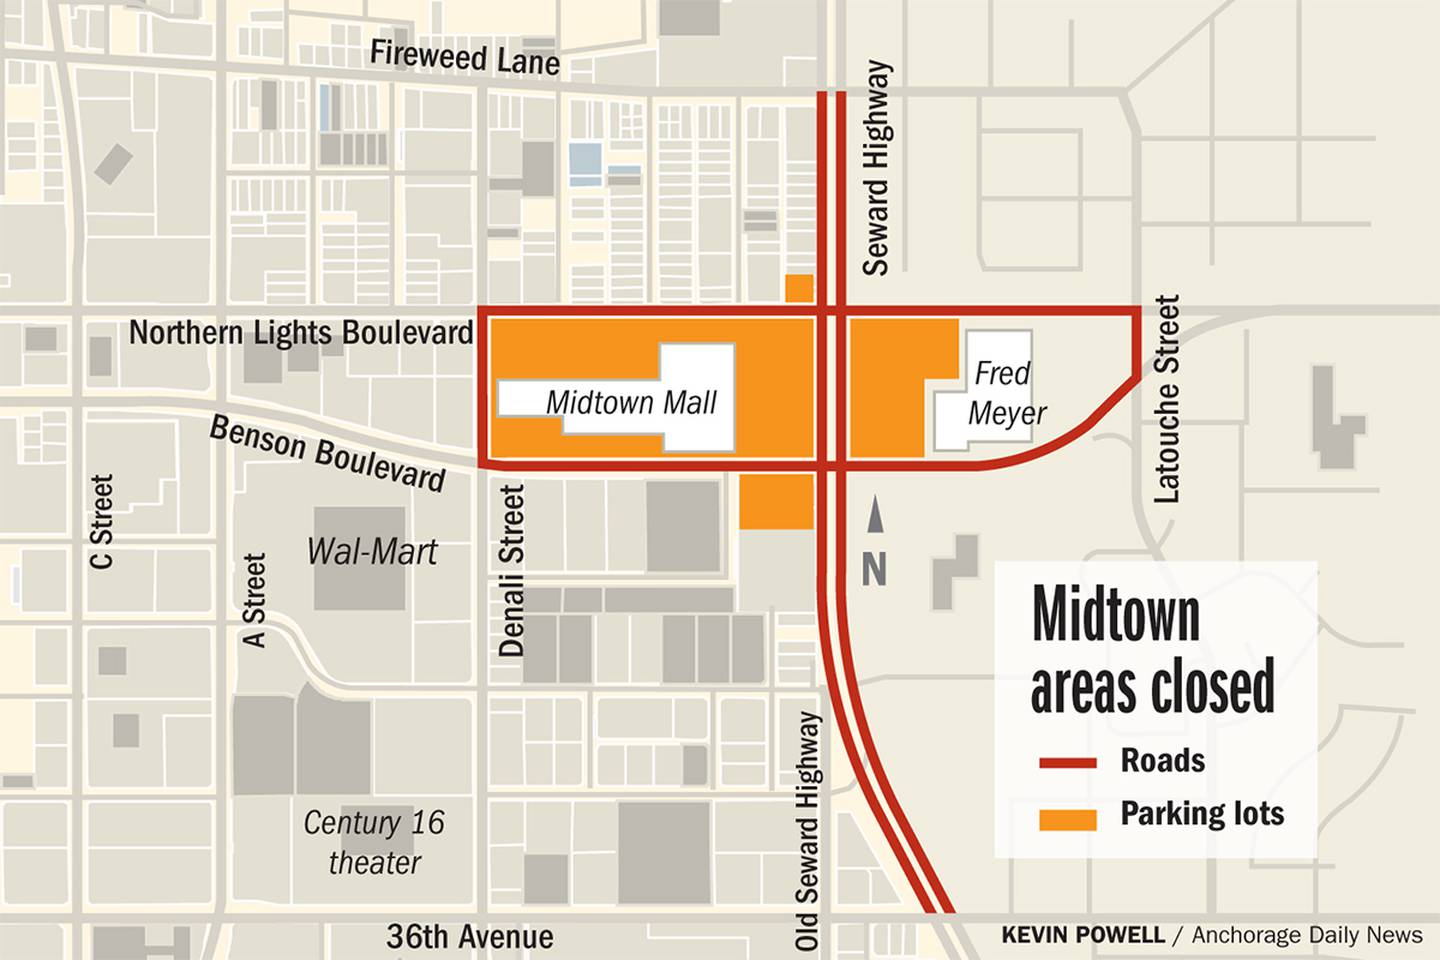 Midtown Mall closures